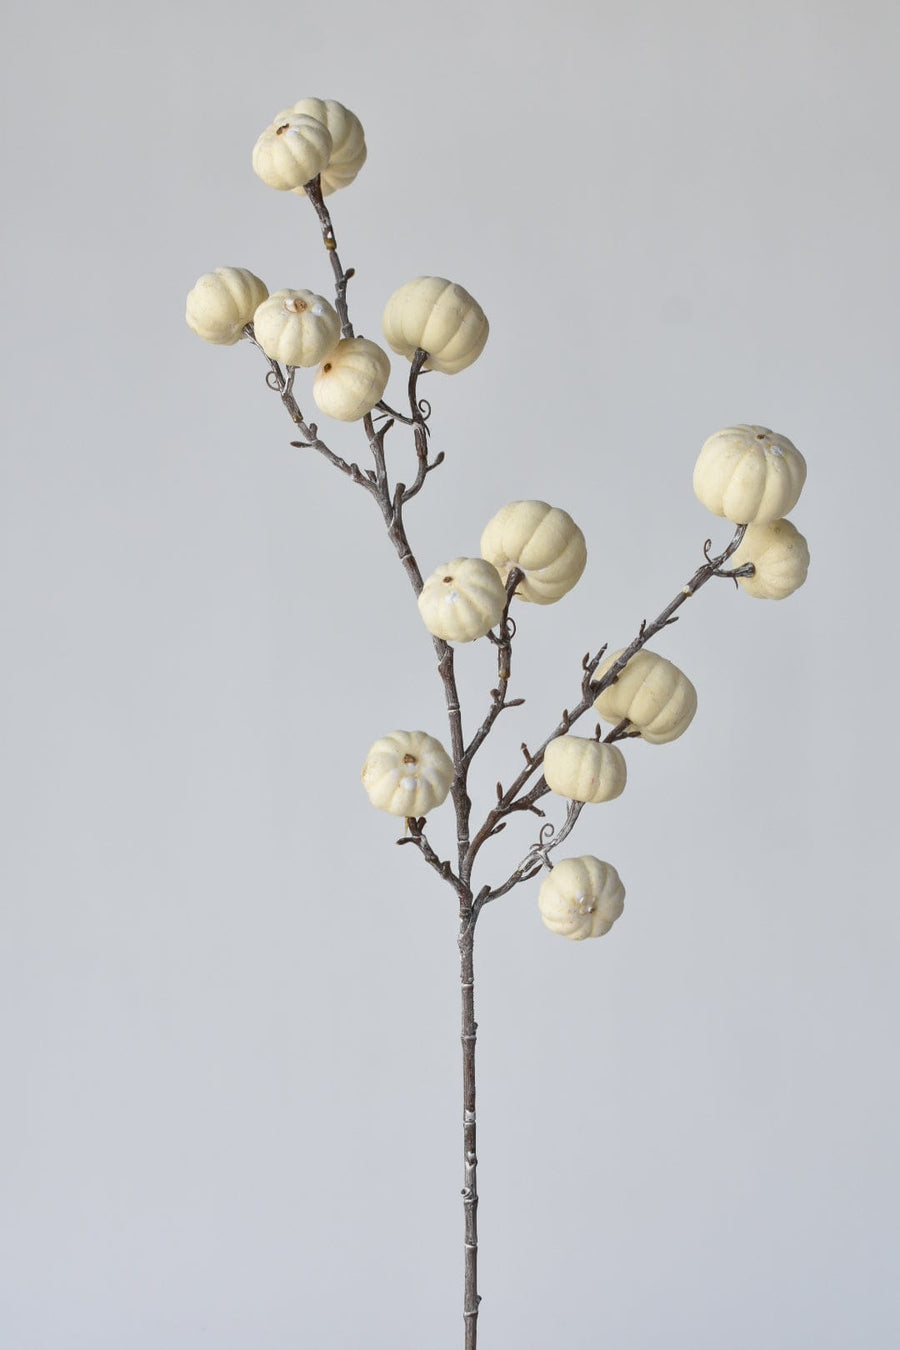 29" Faux White-Washed Pumkins On A Branch: Cream and White